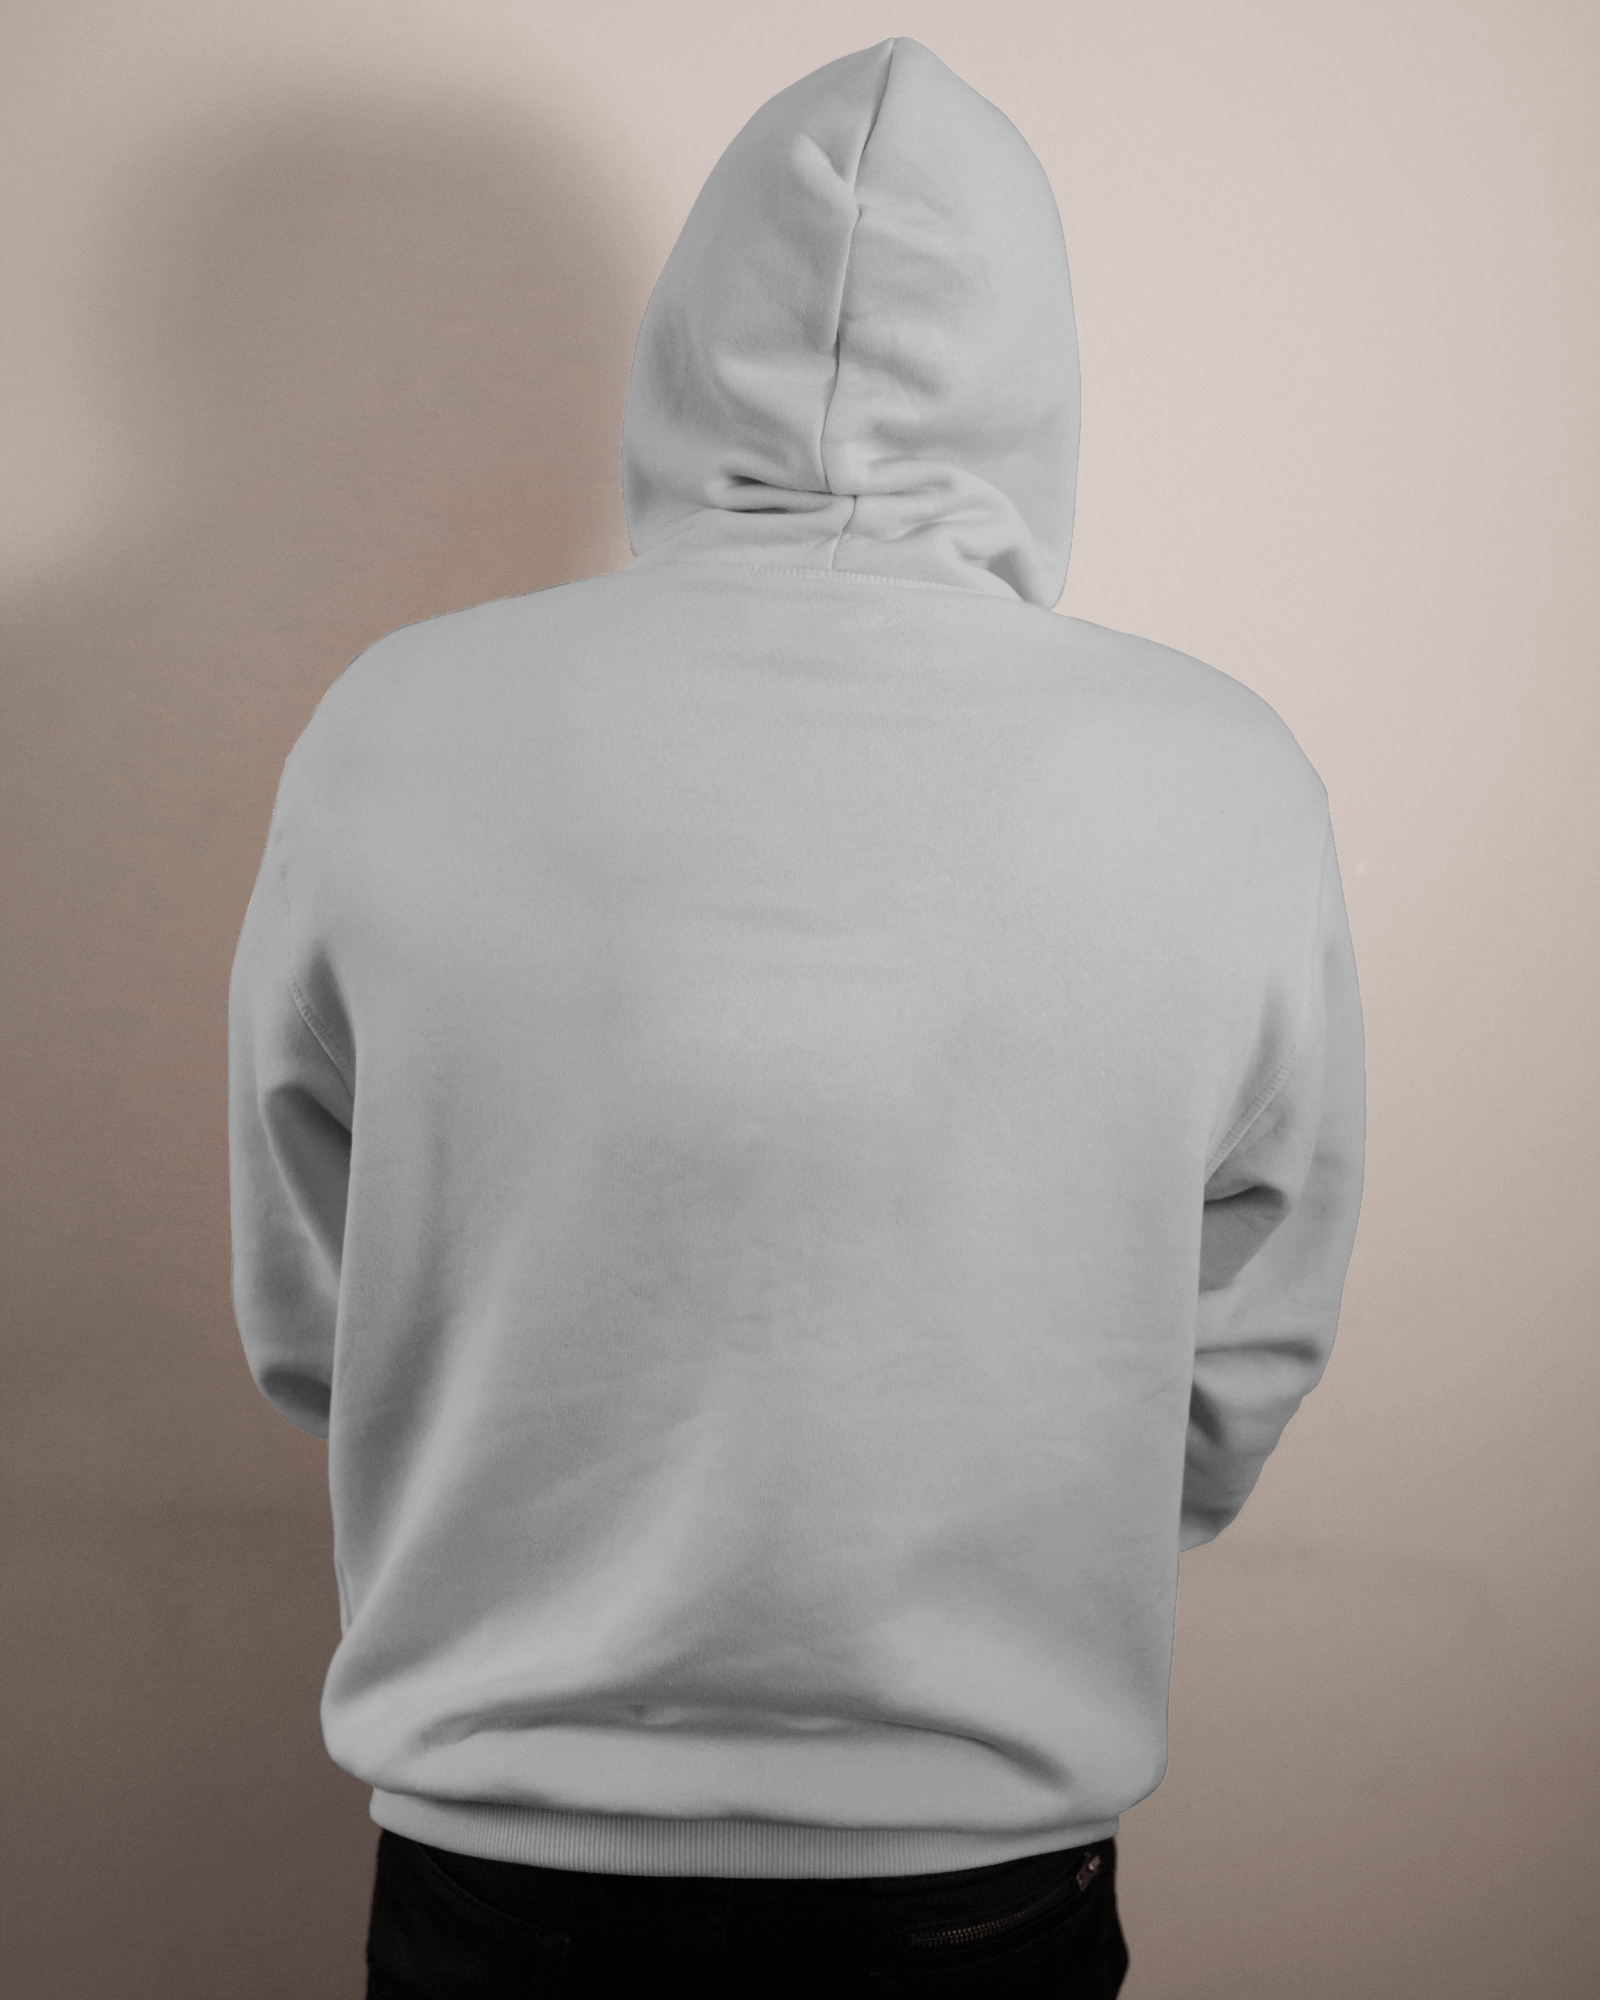 404 Quote Printed hoodies gray Colour | Bratma Hoodies | New Arrival